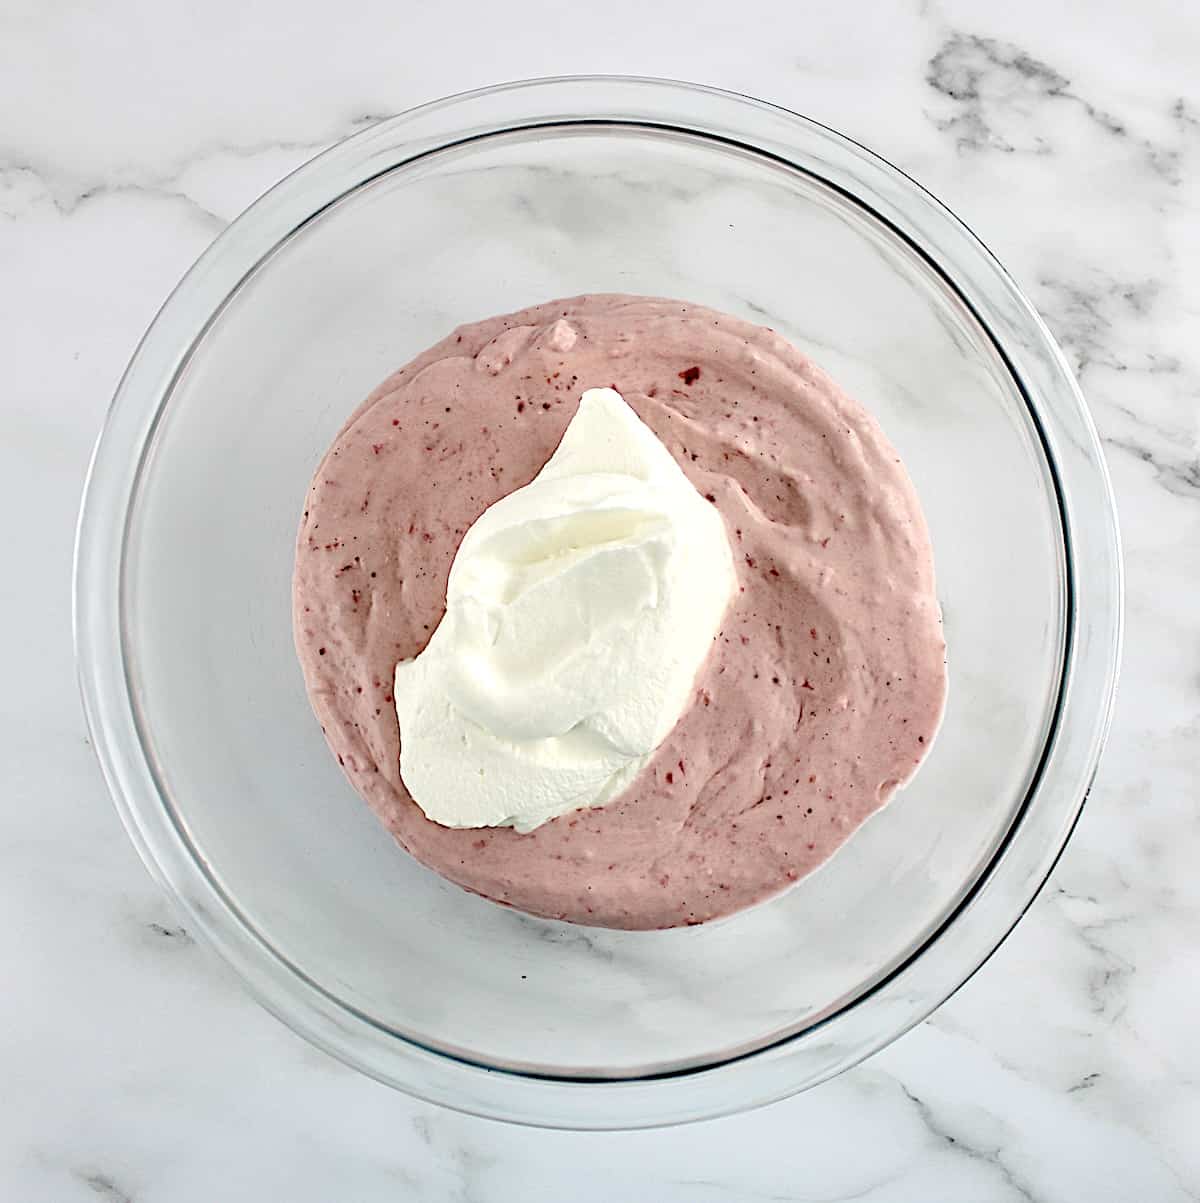 whip cream dollop over strawberry mousse in glass bowl